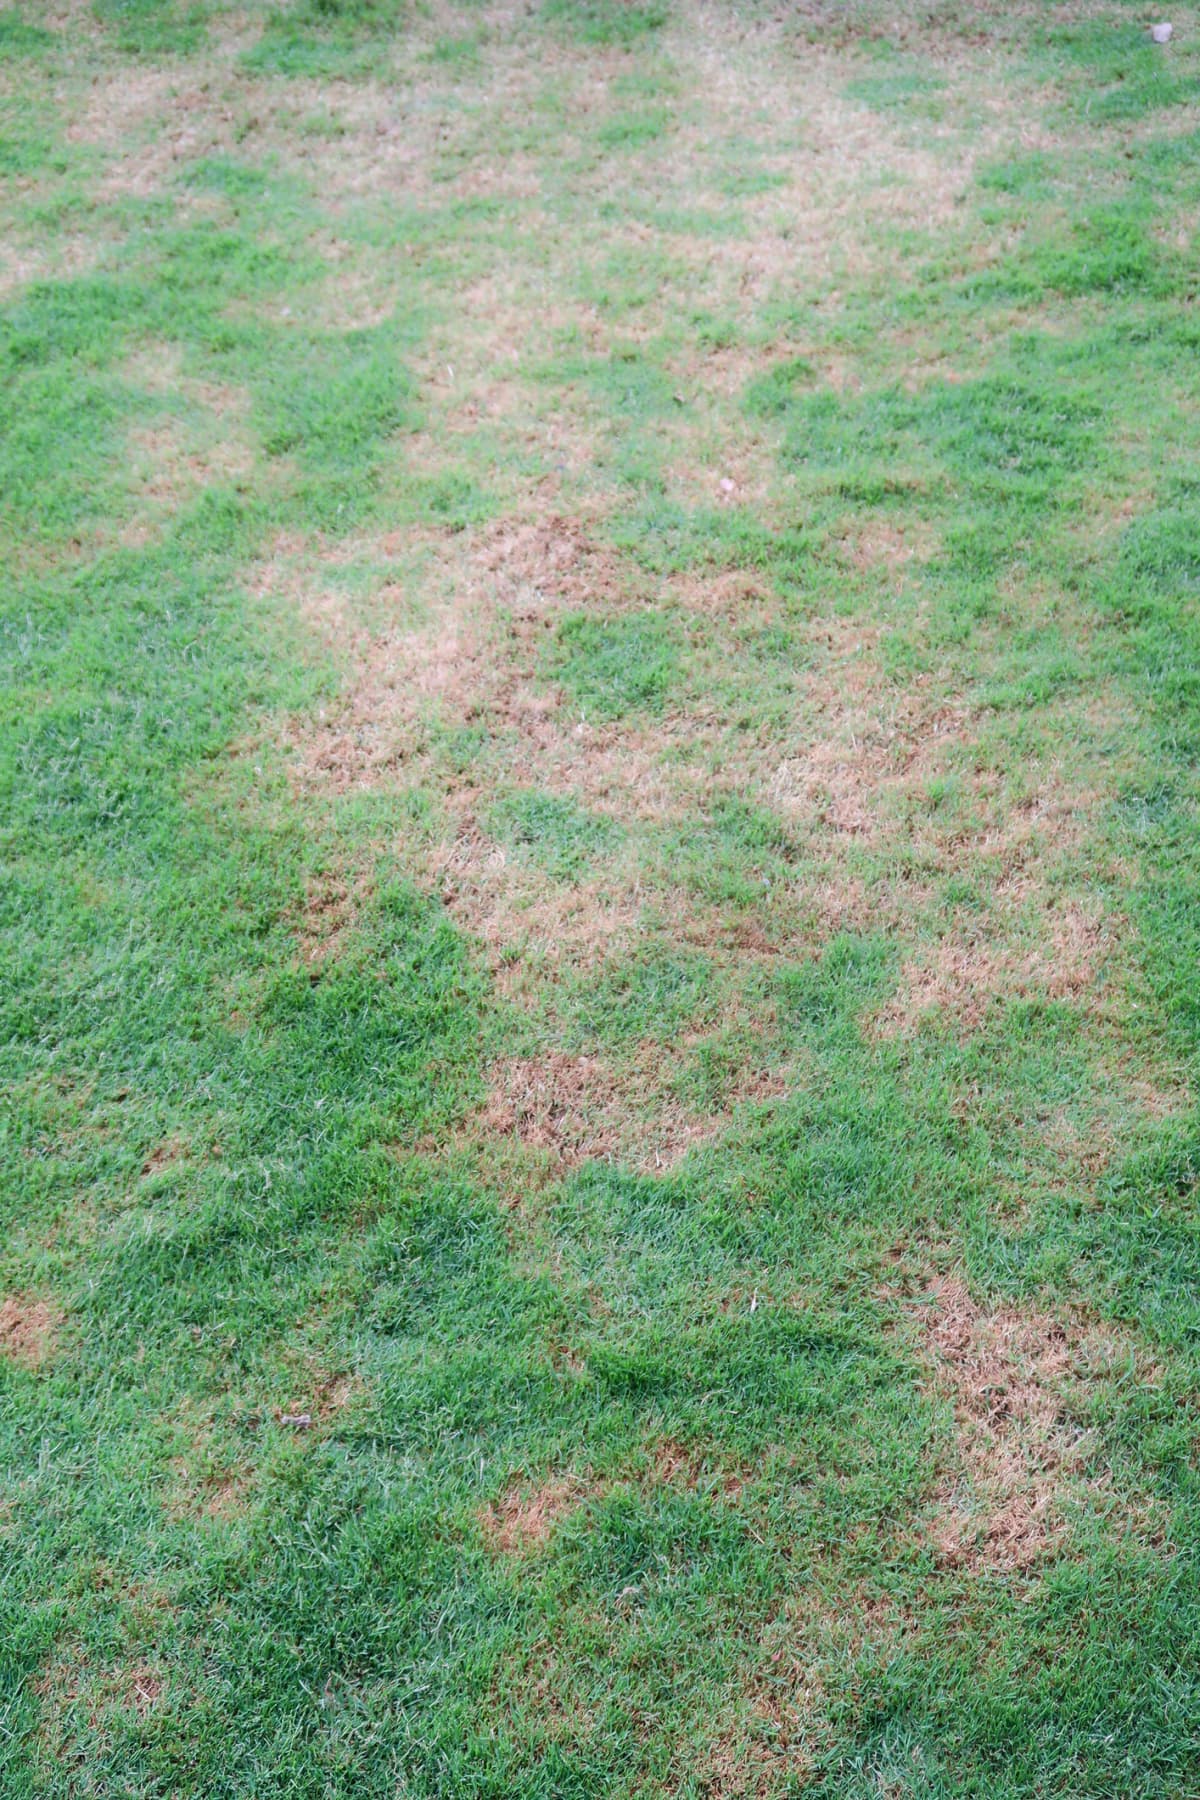 A lawn with thin, patchy grass